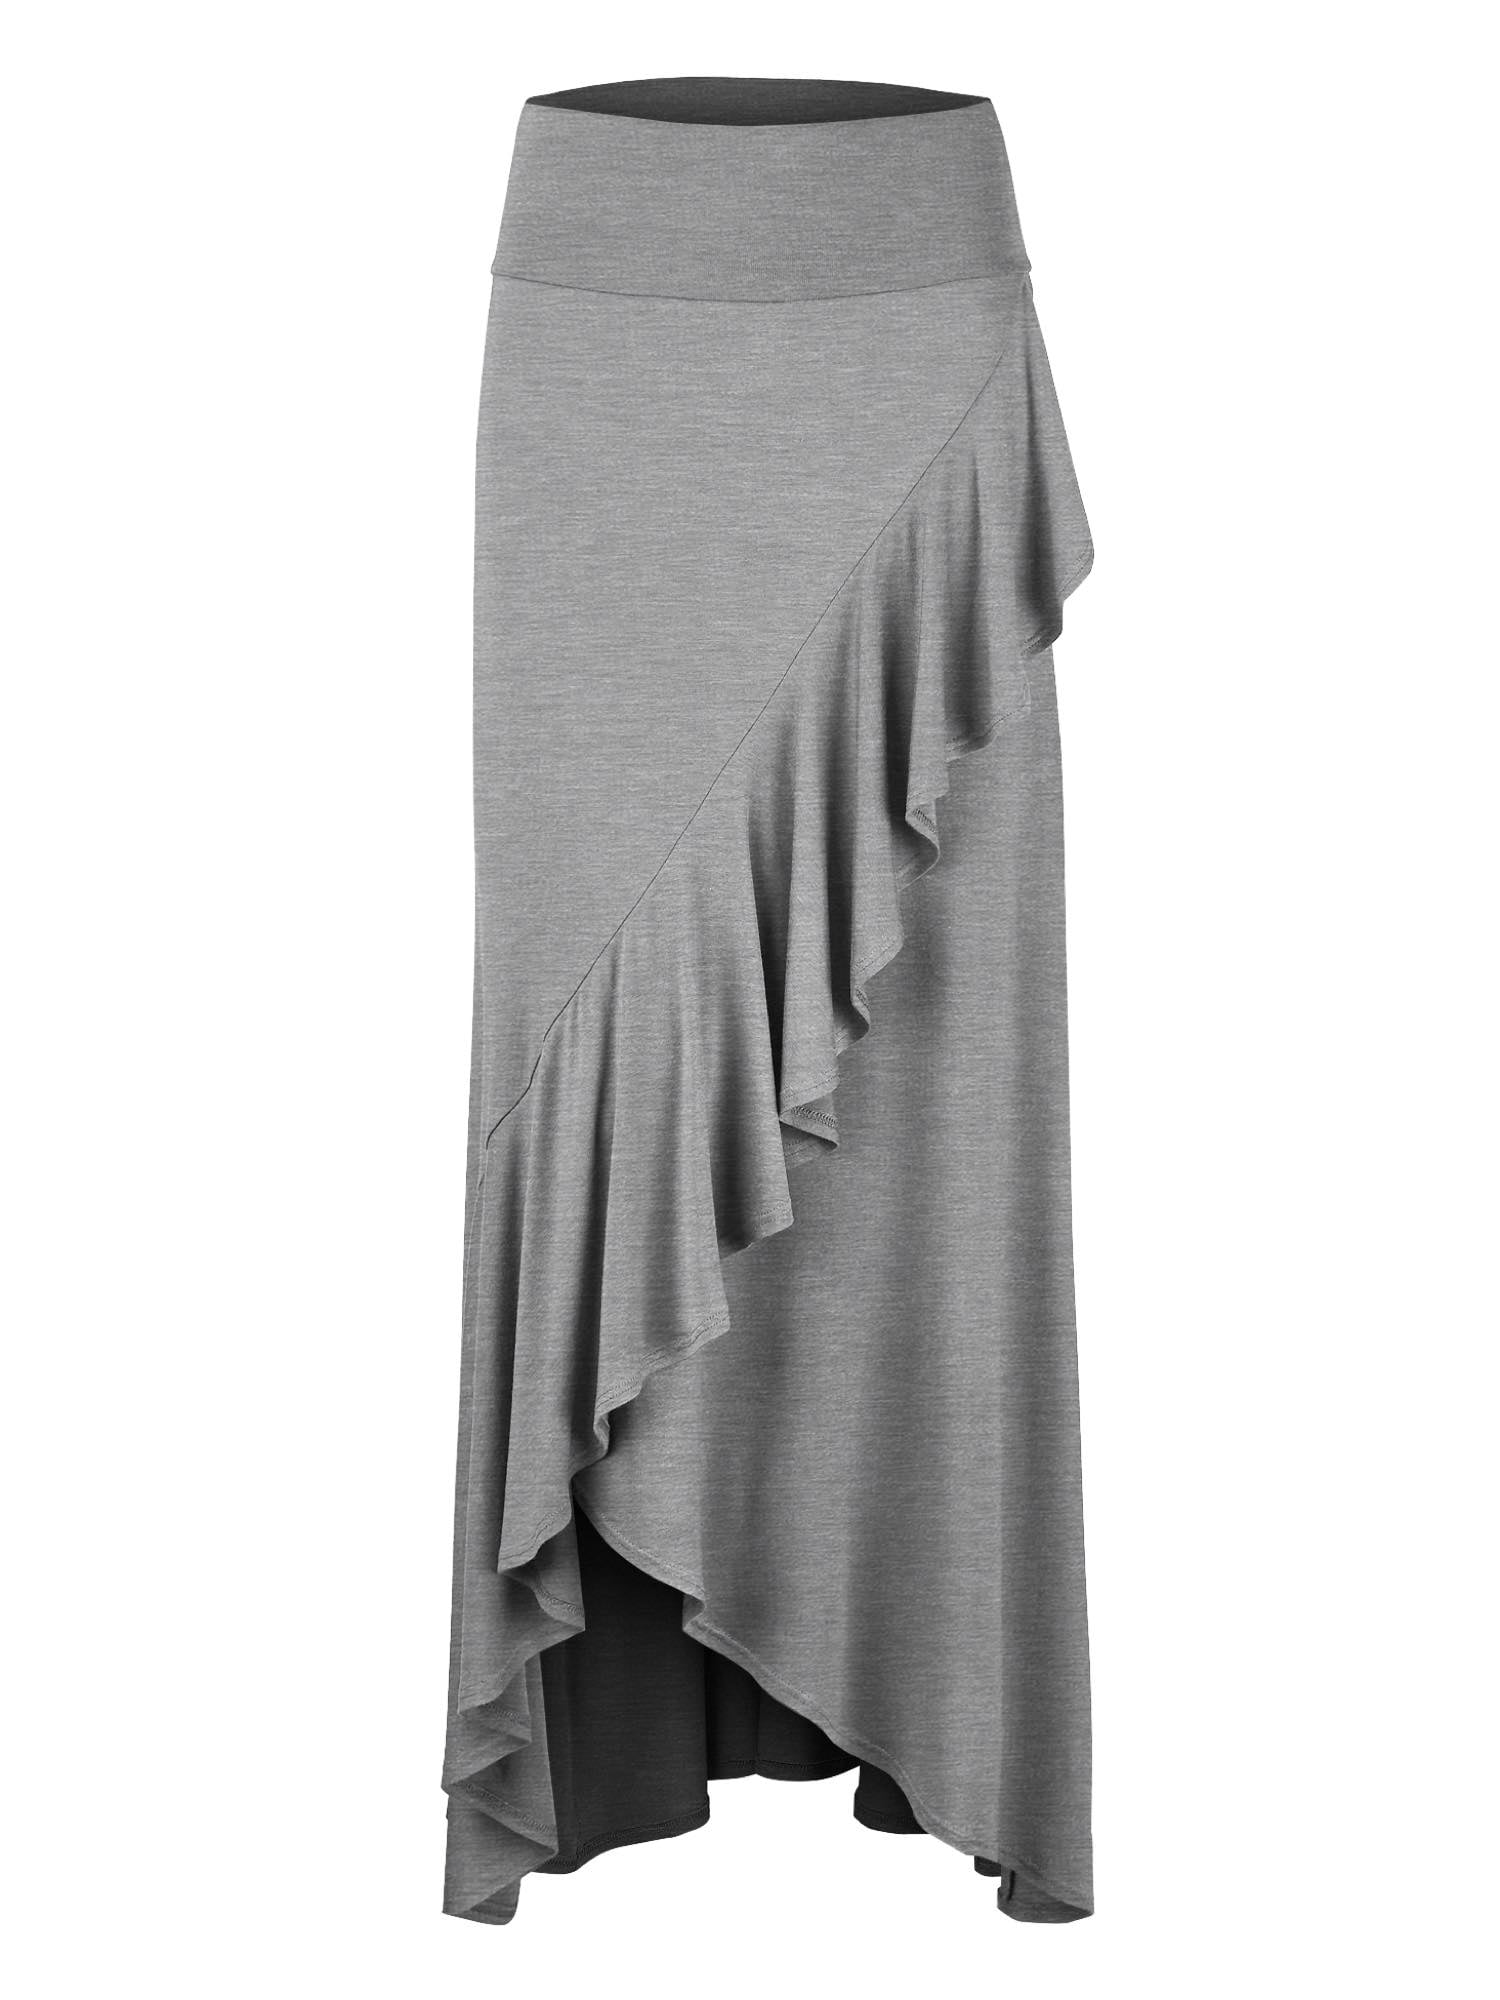 MBJ WB1356 Womens Wrapped High Low Ruffle Maxi Skirt XL HEATHER_GREY ...